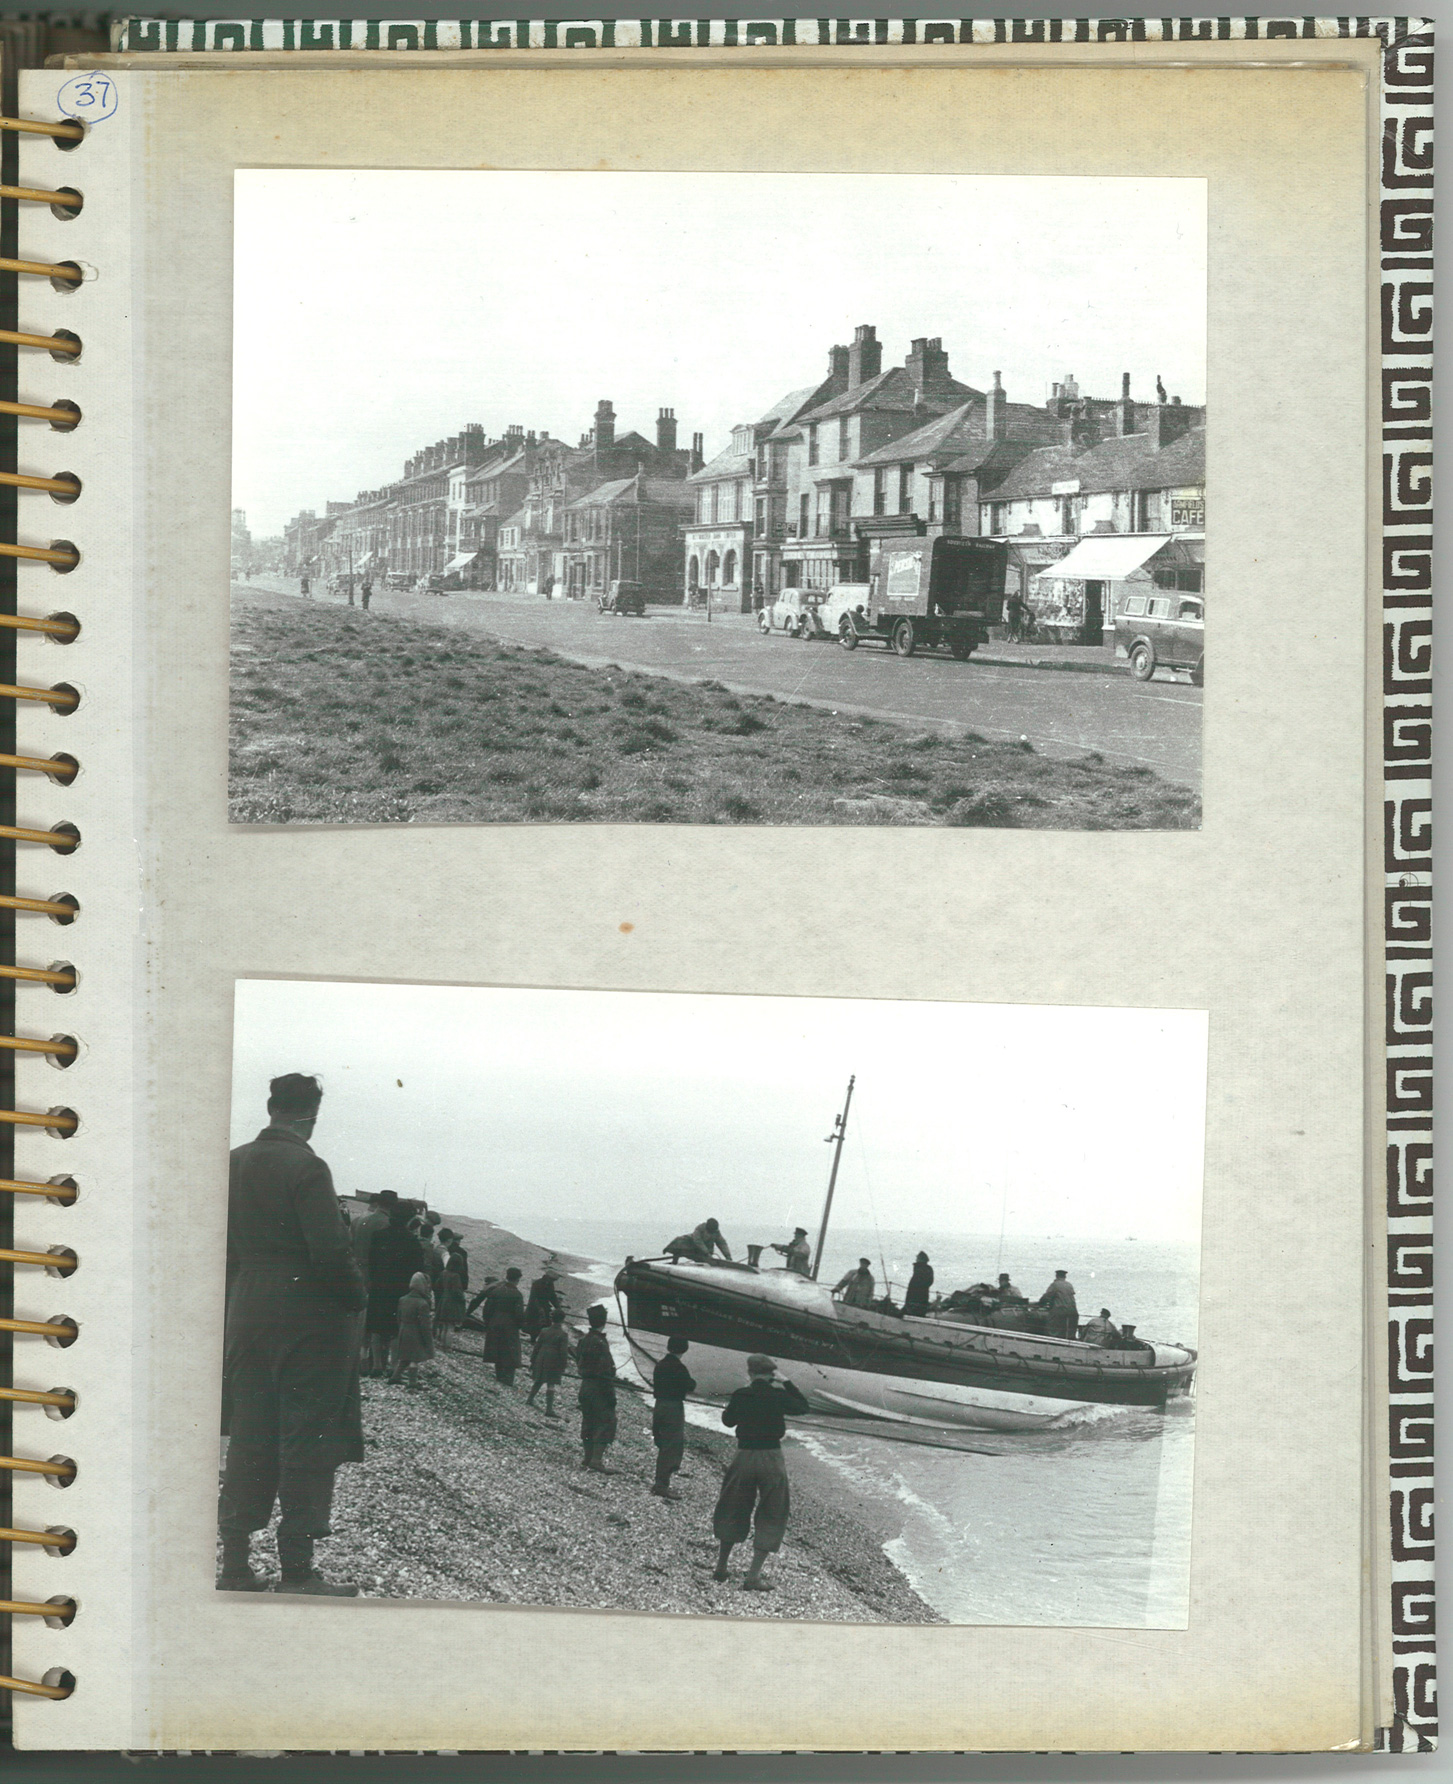 P37: Deal, Kent in the 1950s